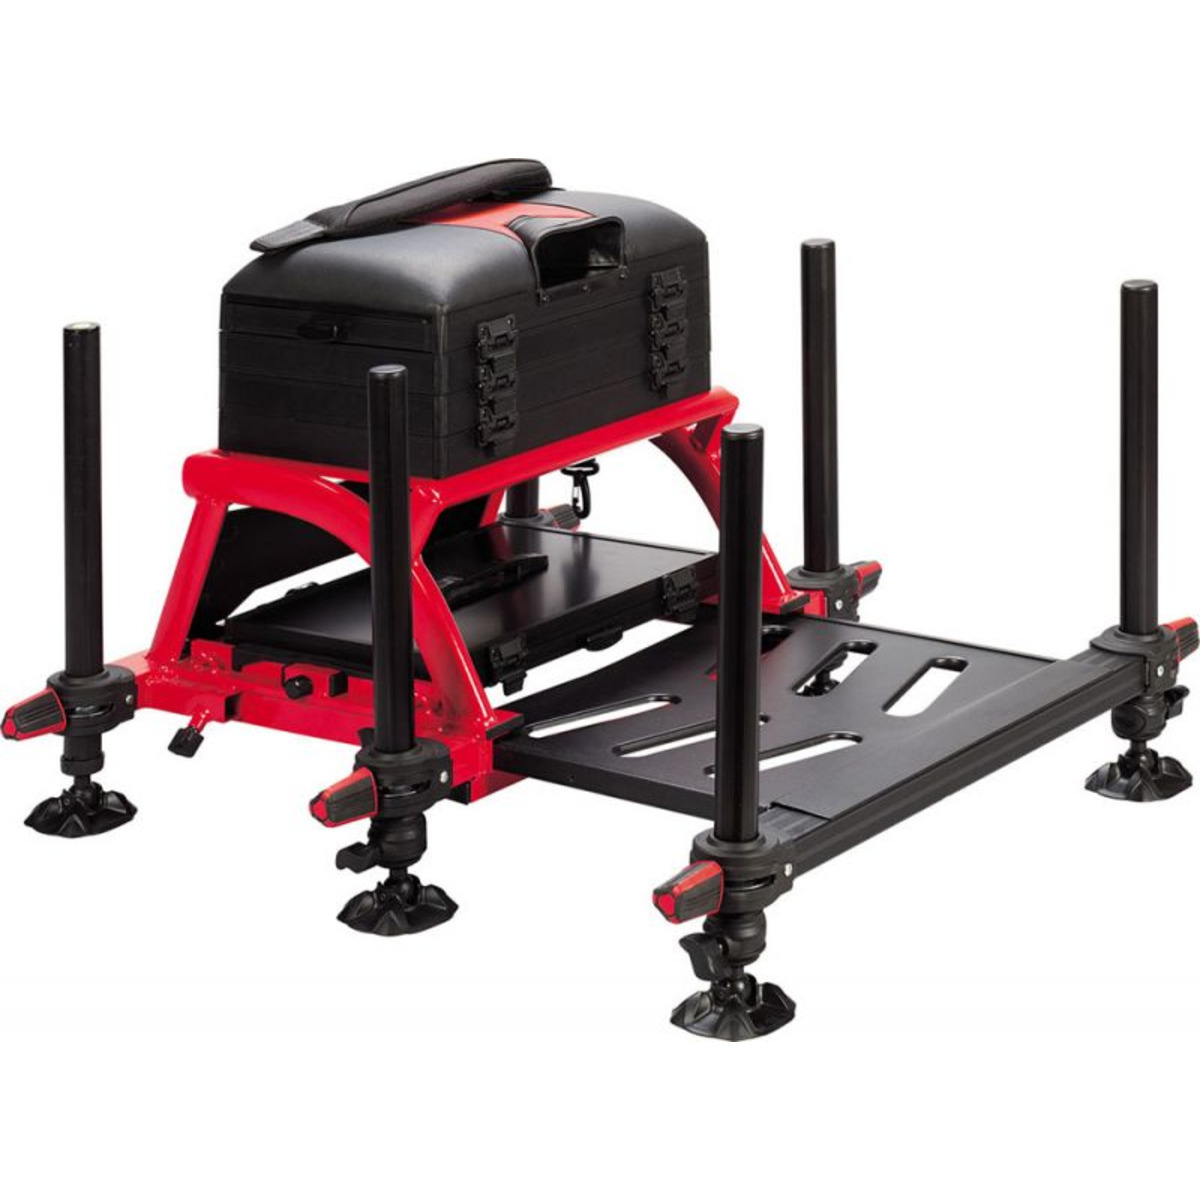 Trabucco Seatbox Gnt-X36 Station - Red